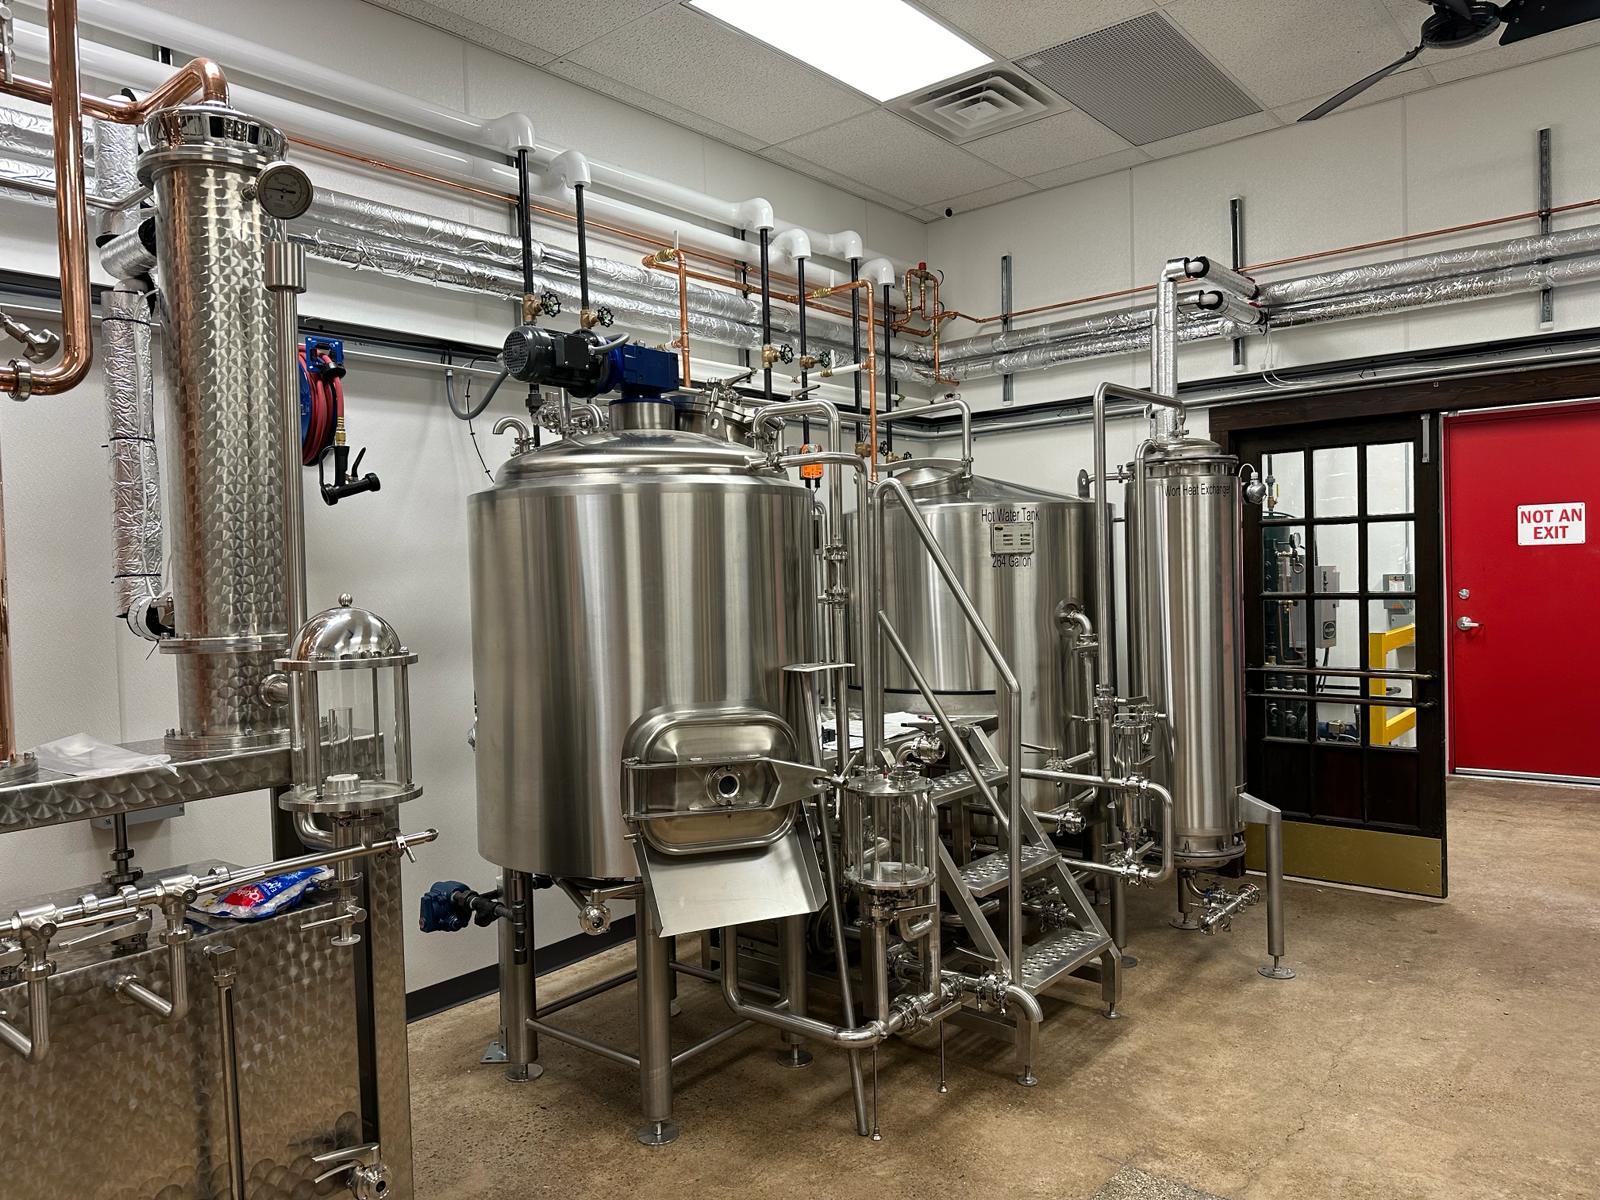 500L Distillery Project for Old Station 31 Spirits in Wisconsin, USA